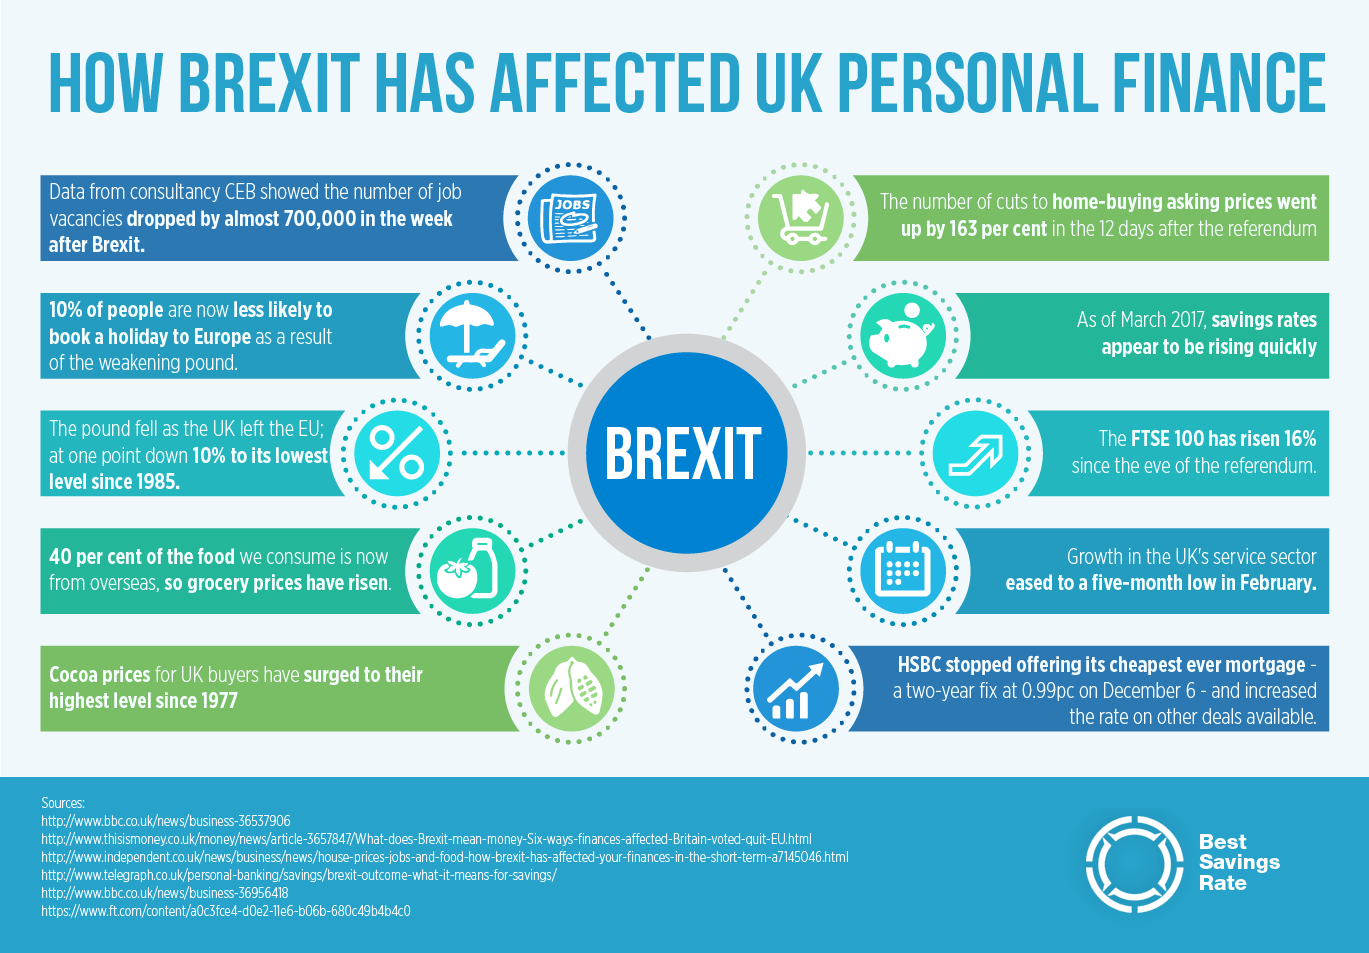 The Brexit Effect - Personal Finance and the UK Economy Suffers